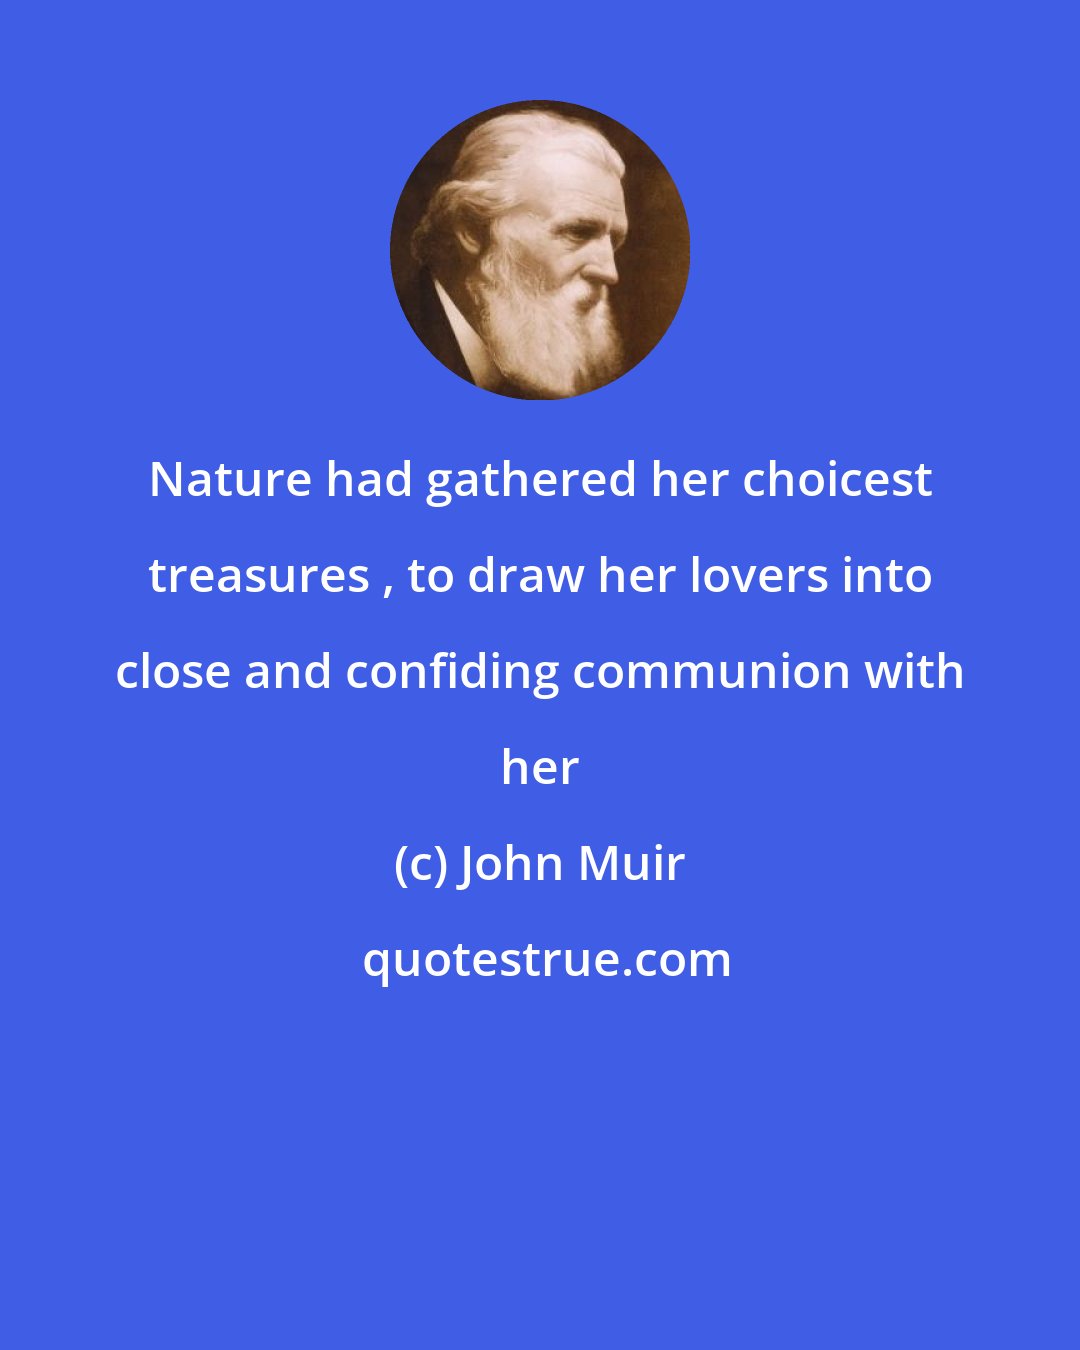 John Muir: Nature had gathered her choicest treasures , to draw her lovers into close and confiding communion with her